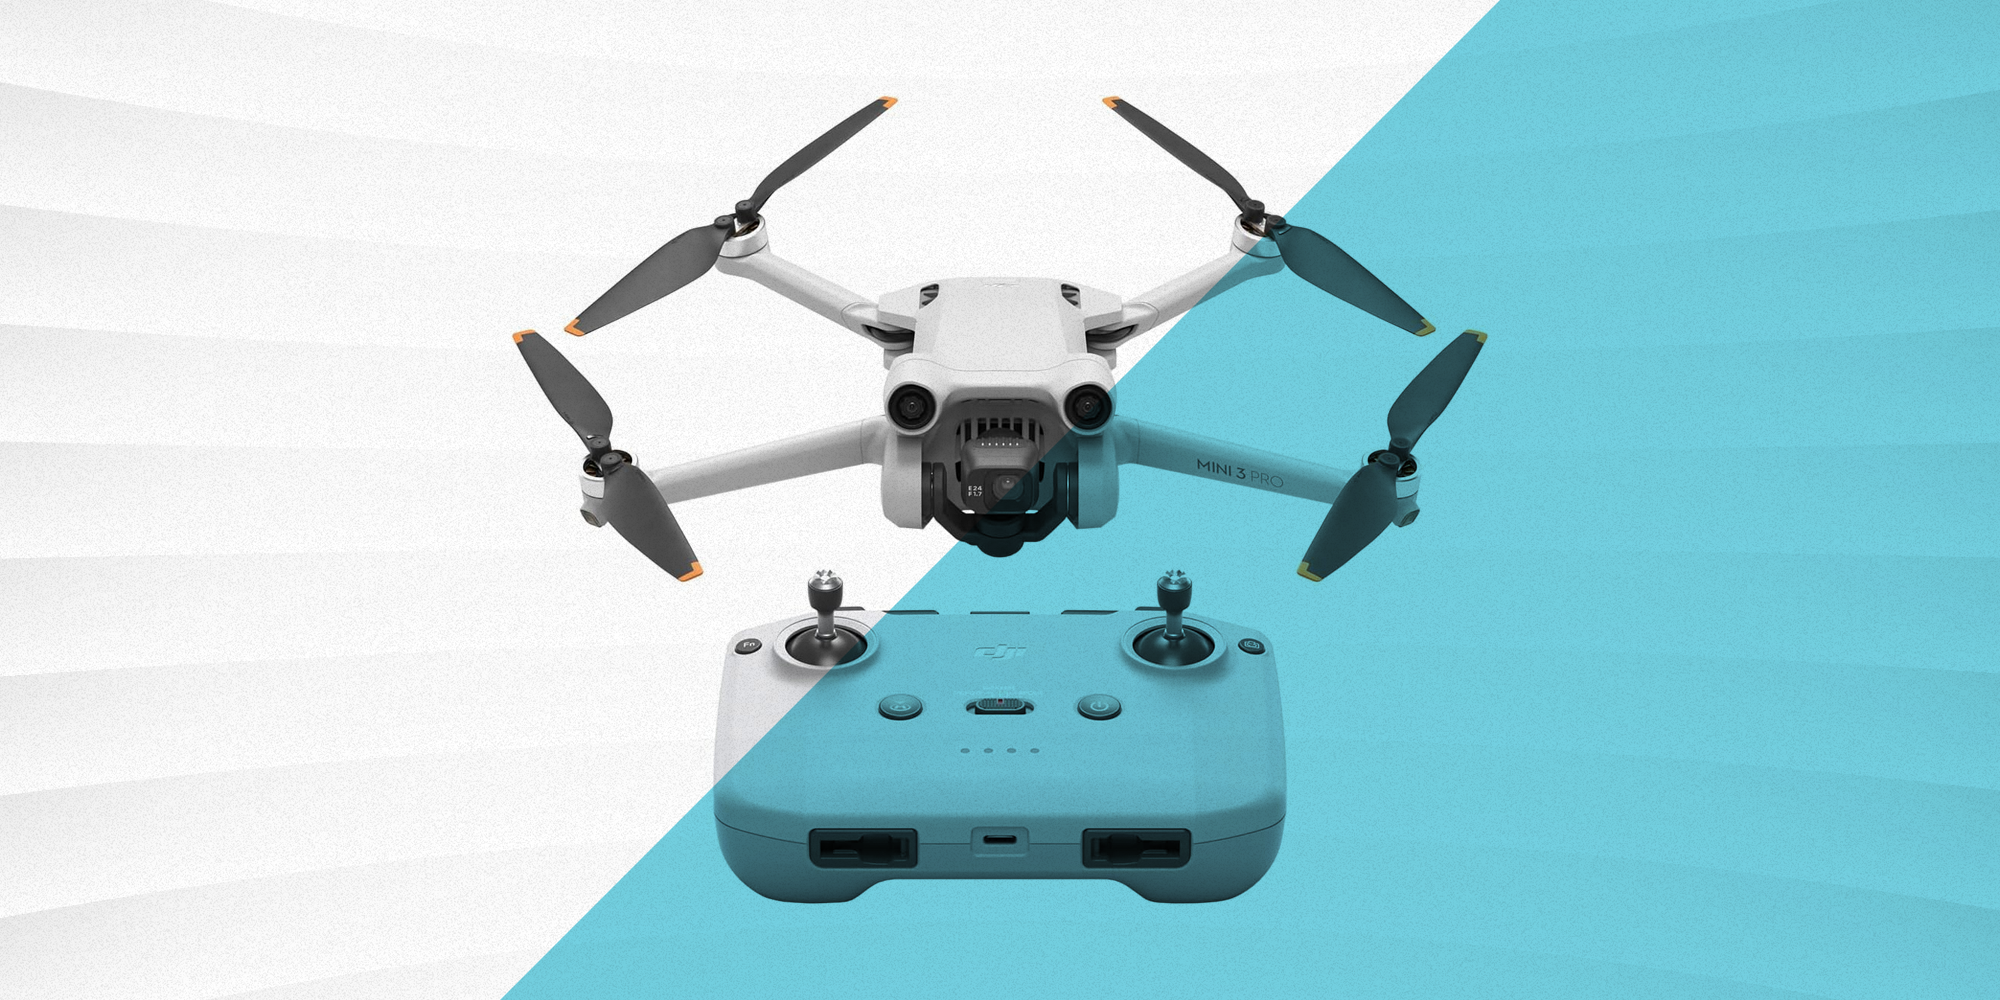 Is DJI Avata good for beginner FPV pilots? Pros and cons (why I ordered one  too)